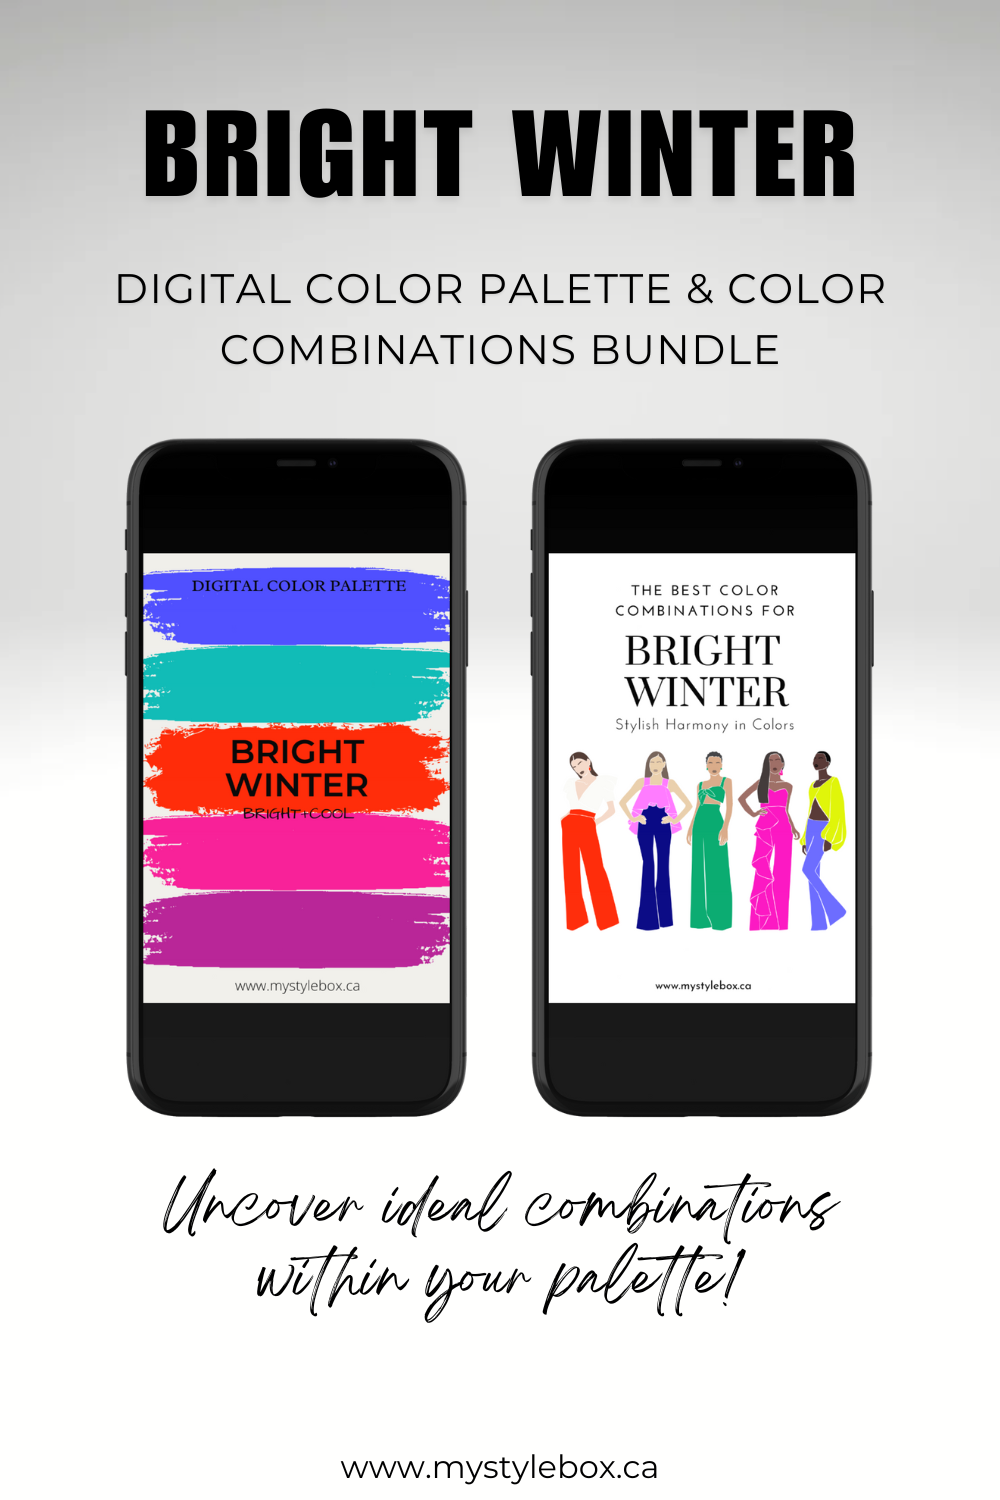 Bright Winter Digital Color Palette and Color Combinations